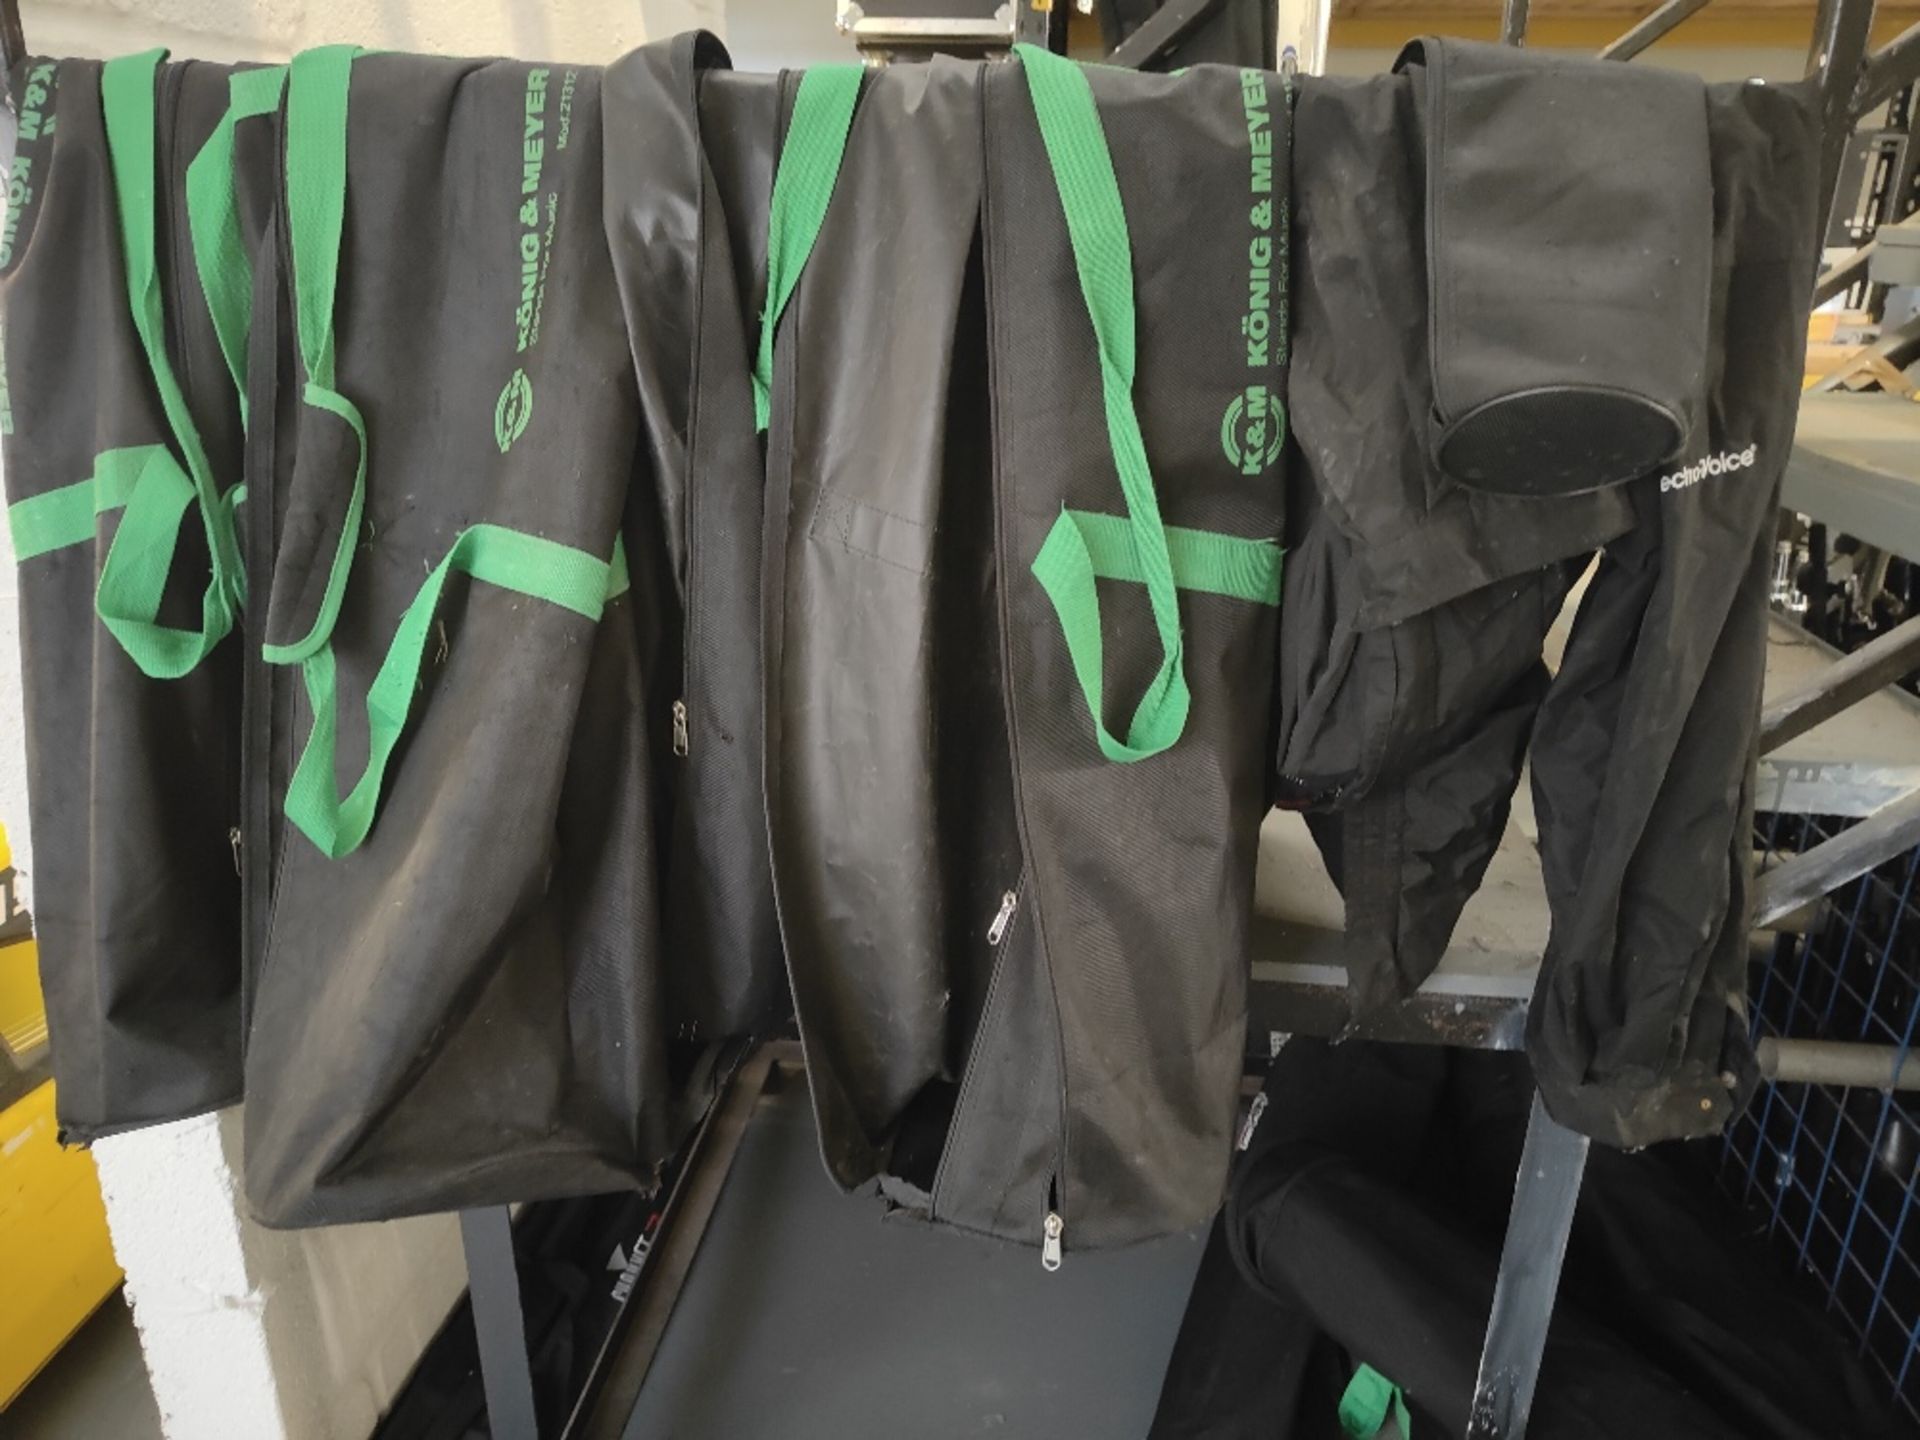 Large Quantity of Sound & Lighting/Microphone Stands and Carry Bags - Image 2 of 3